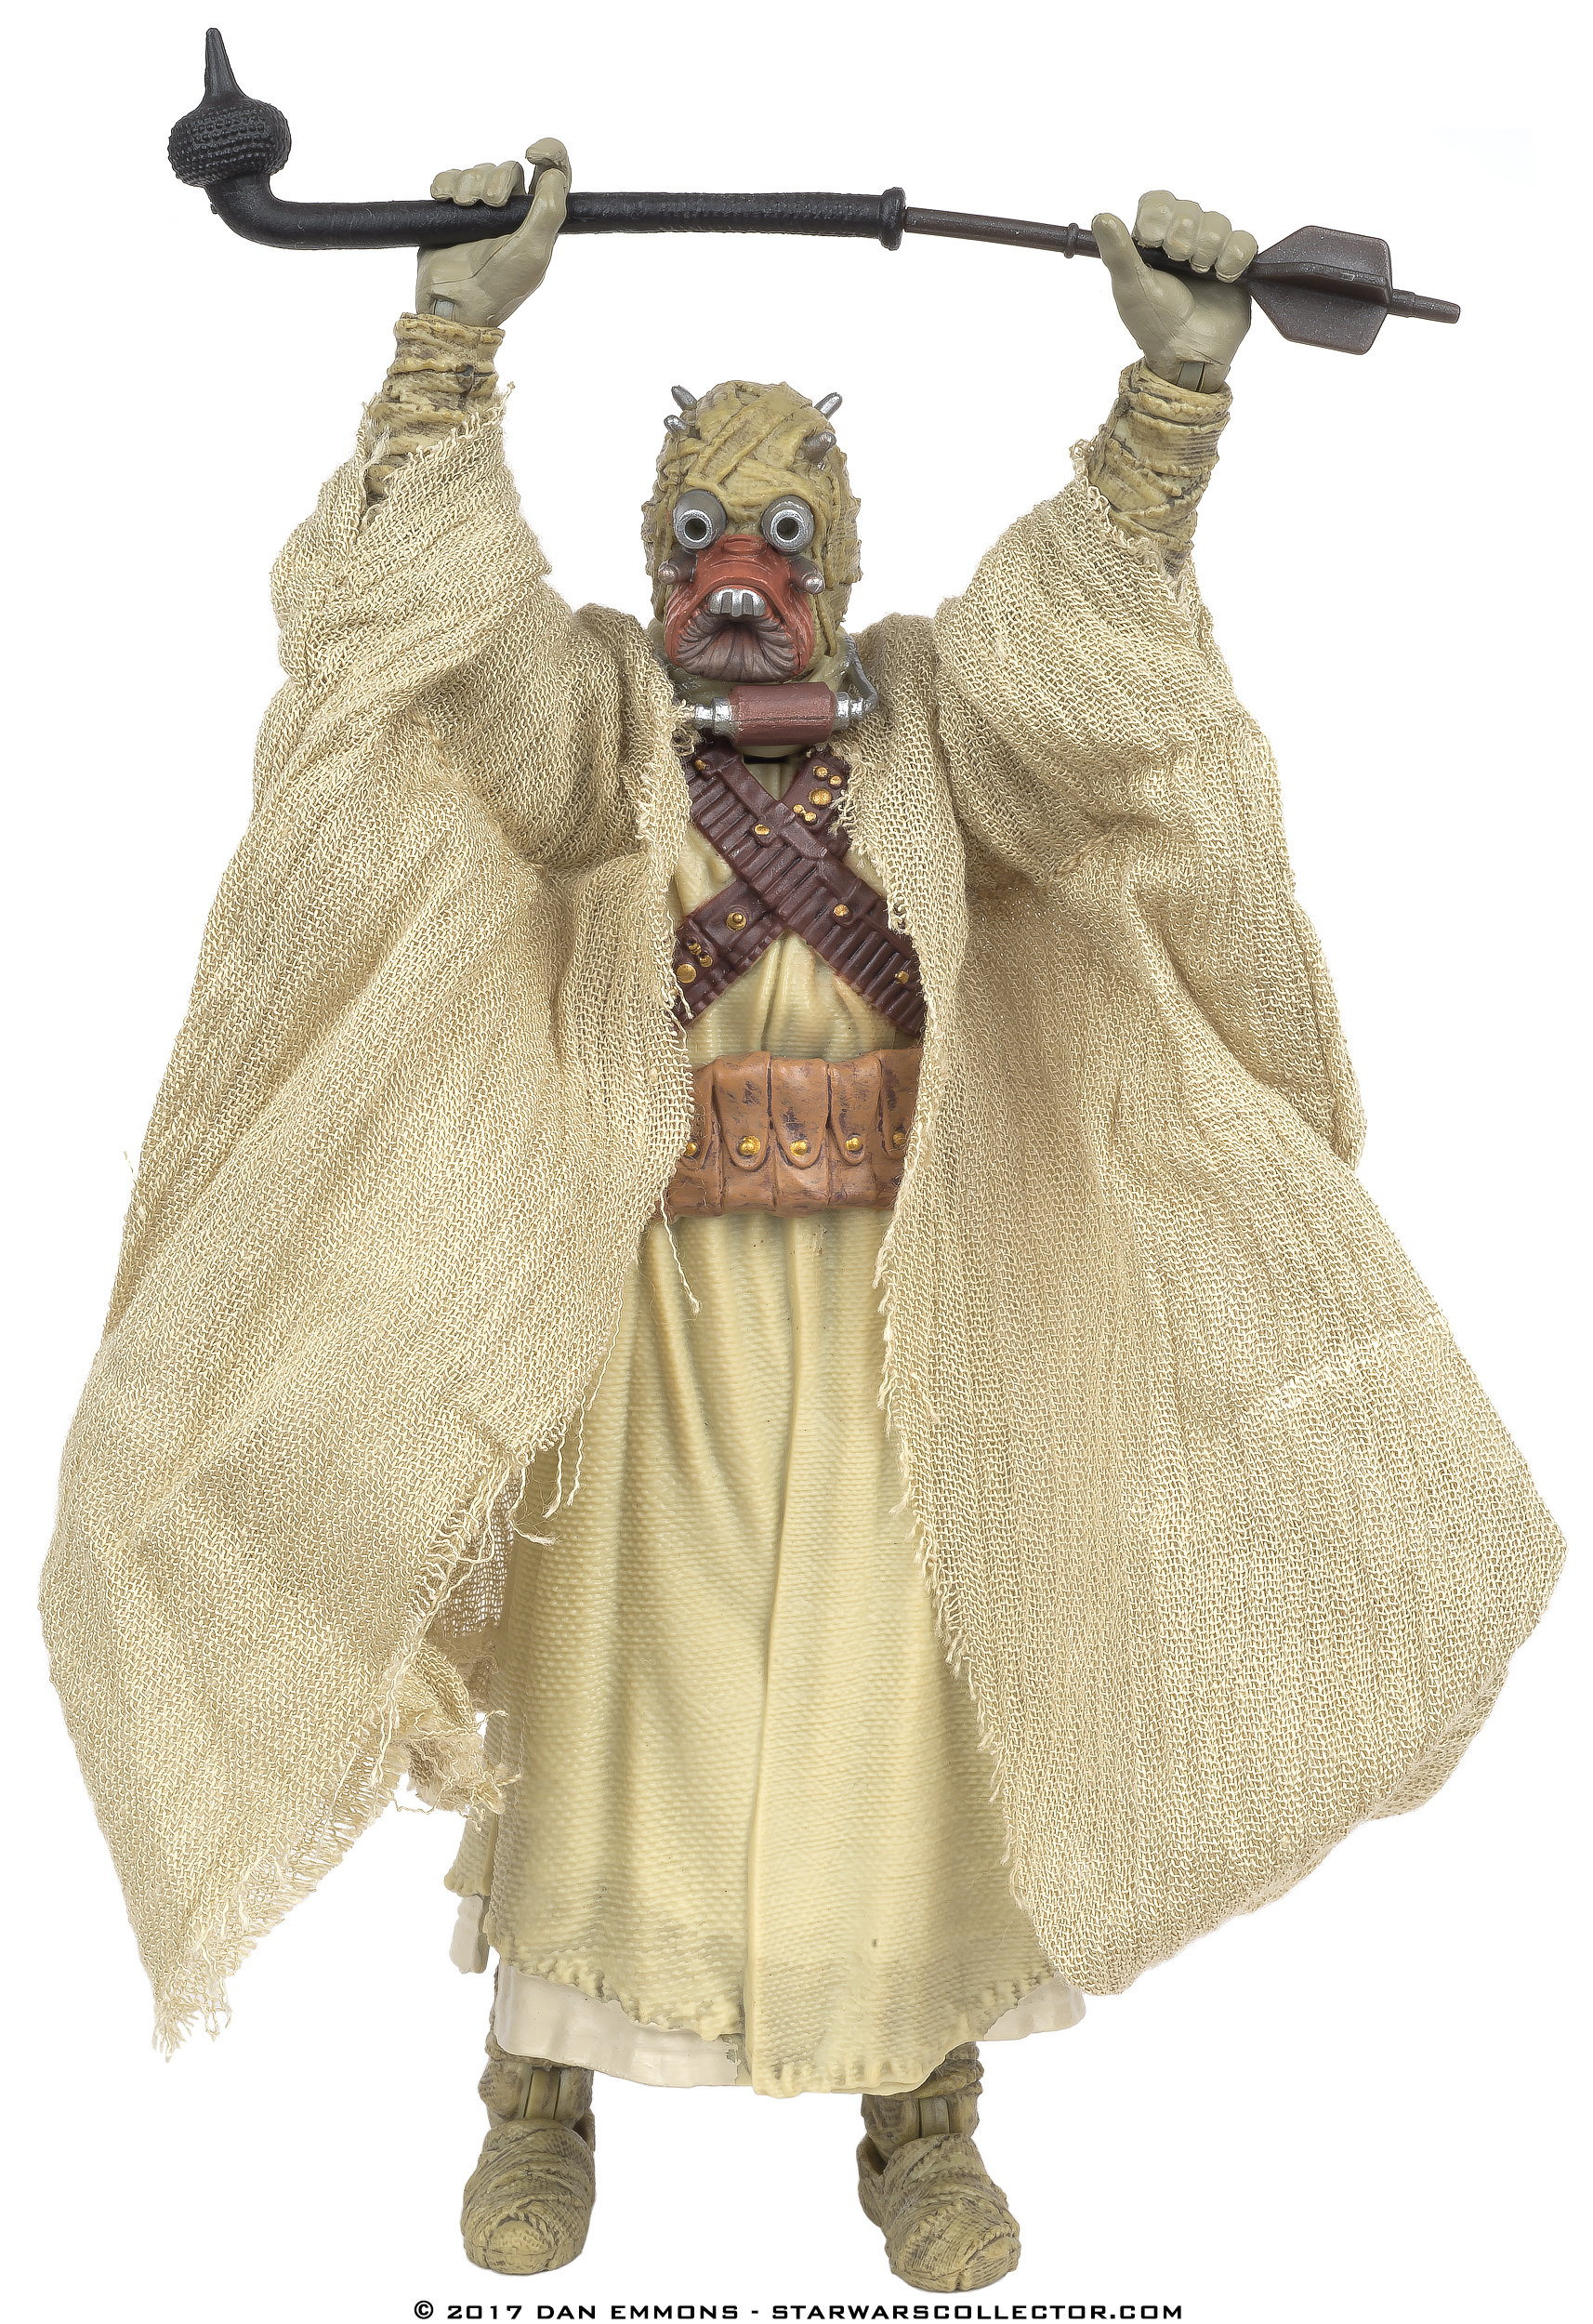 The Black Series 6-Inch 40th Anniversary Sand People